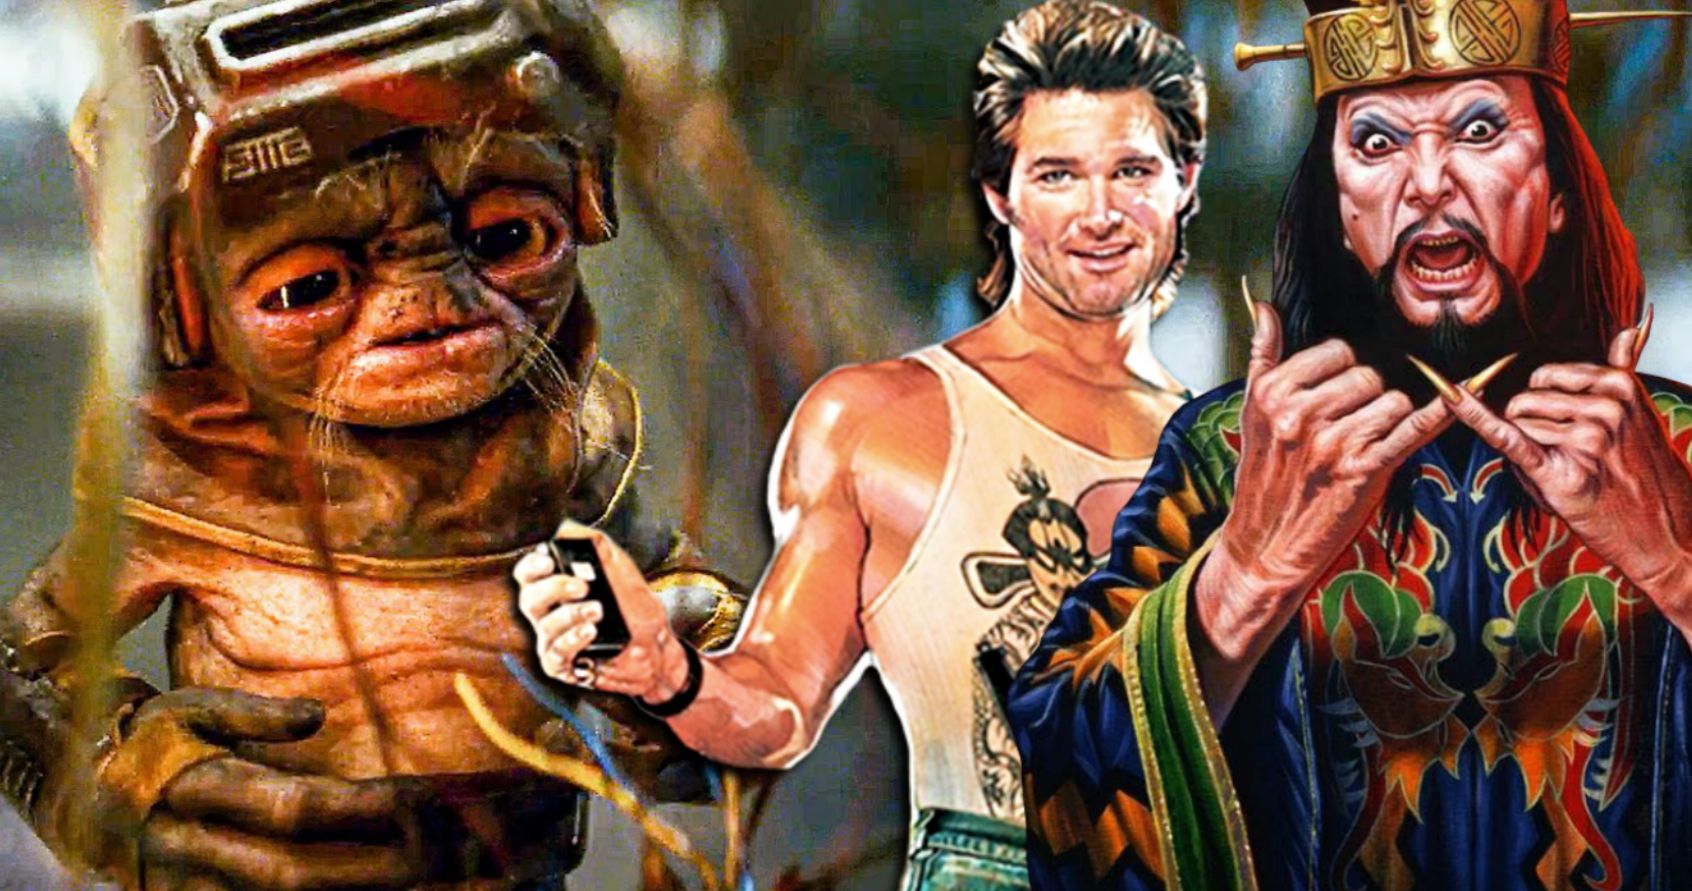 Rise of Skywalker Favorite Babu Frik Was Inspired by Big Trouble in Little China